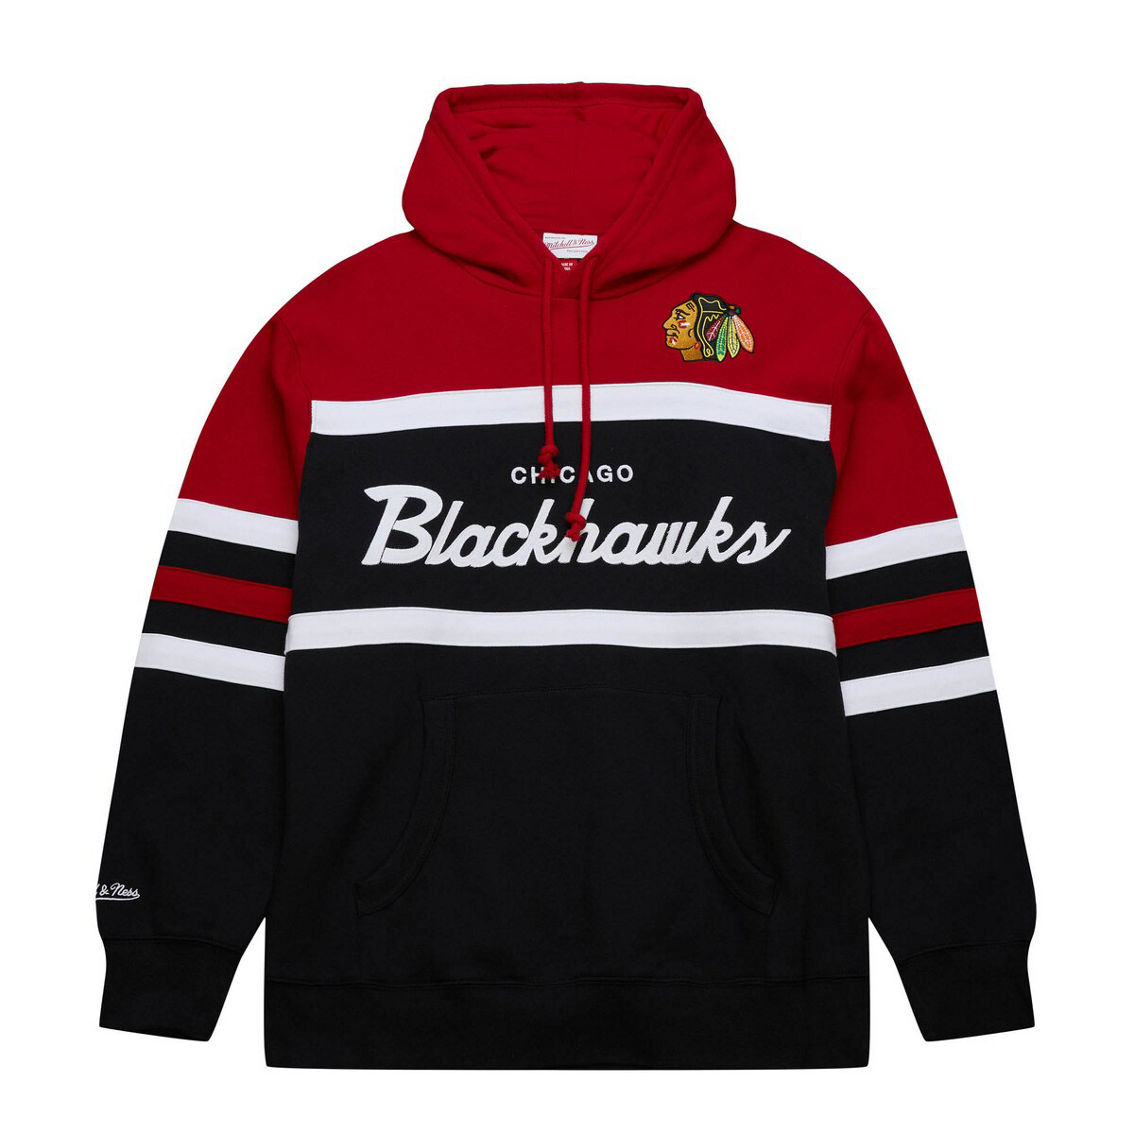 Mitchell & Ness Men's Black/Red Chicago Blackhawks Head Coach Pullover Hoodie - Image 3 of 4